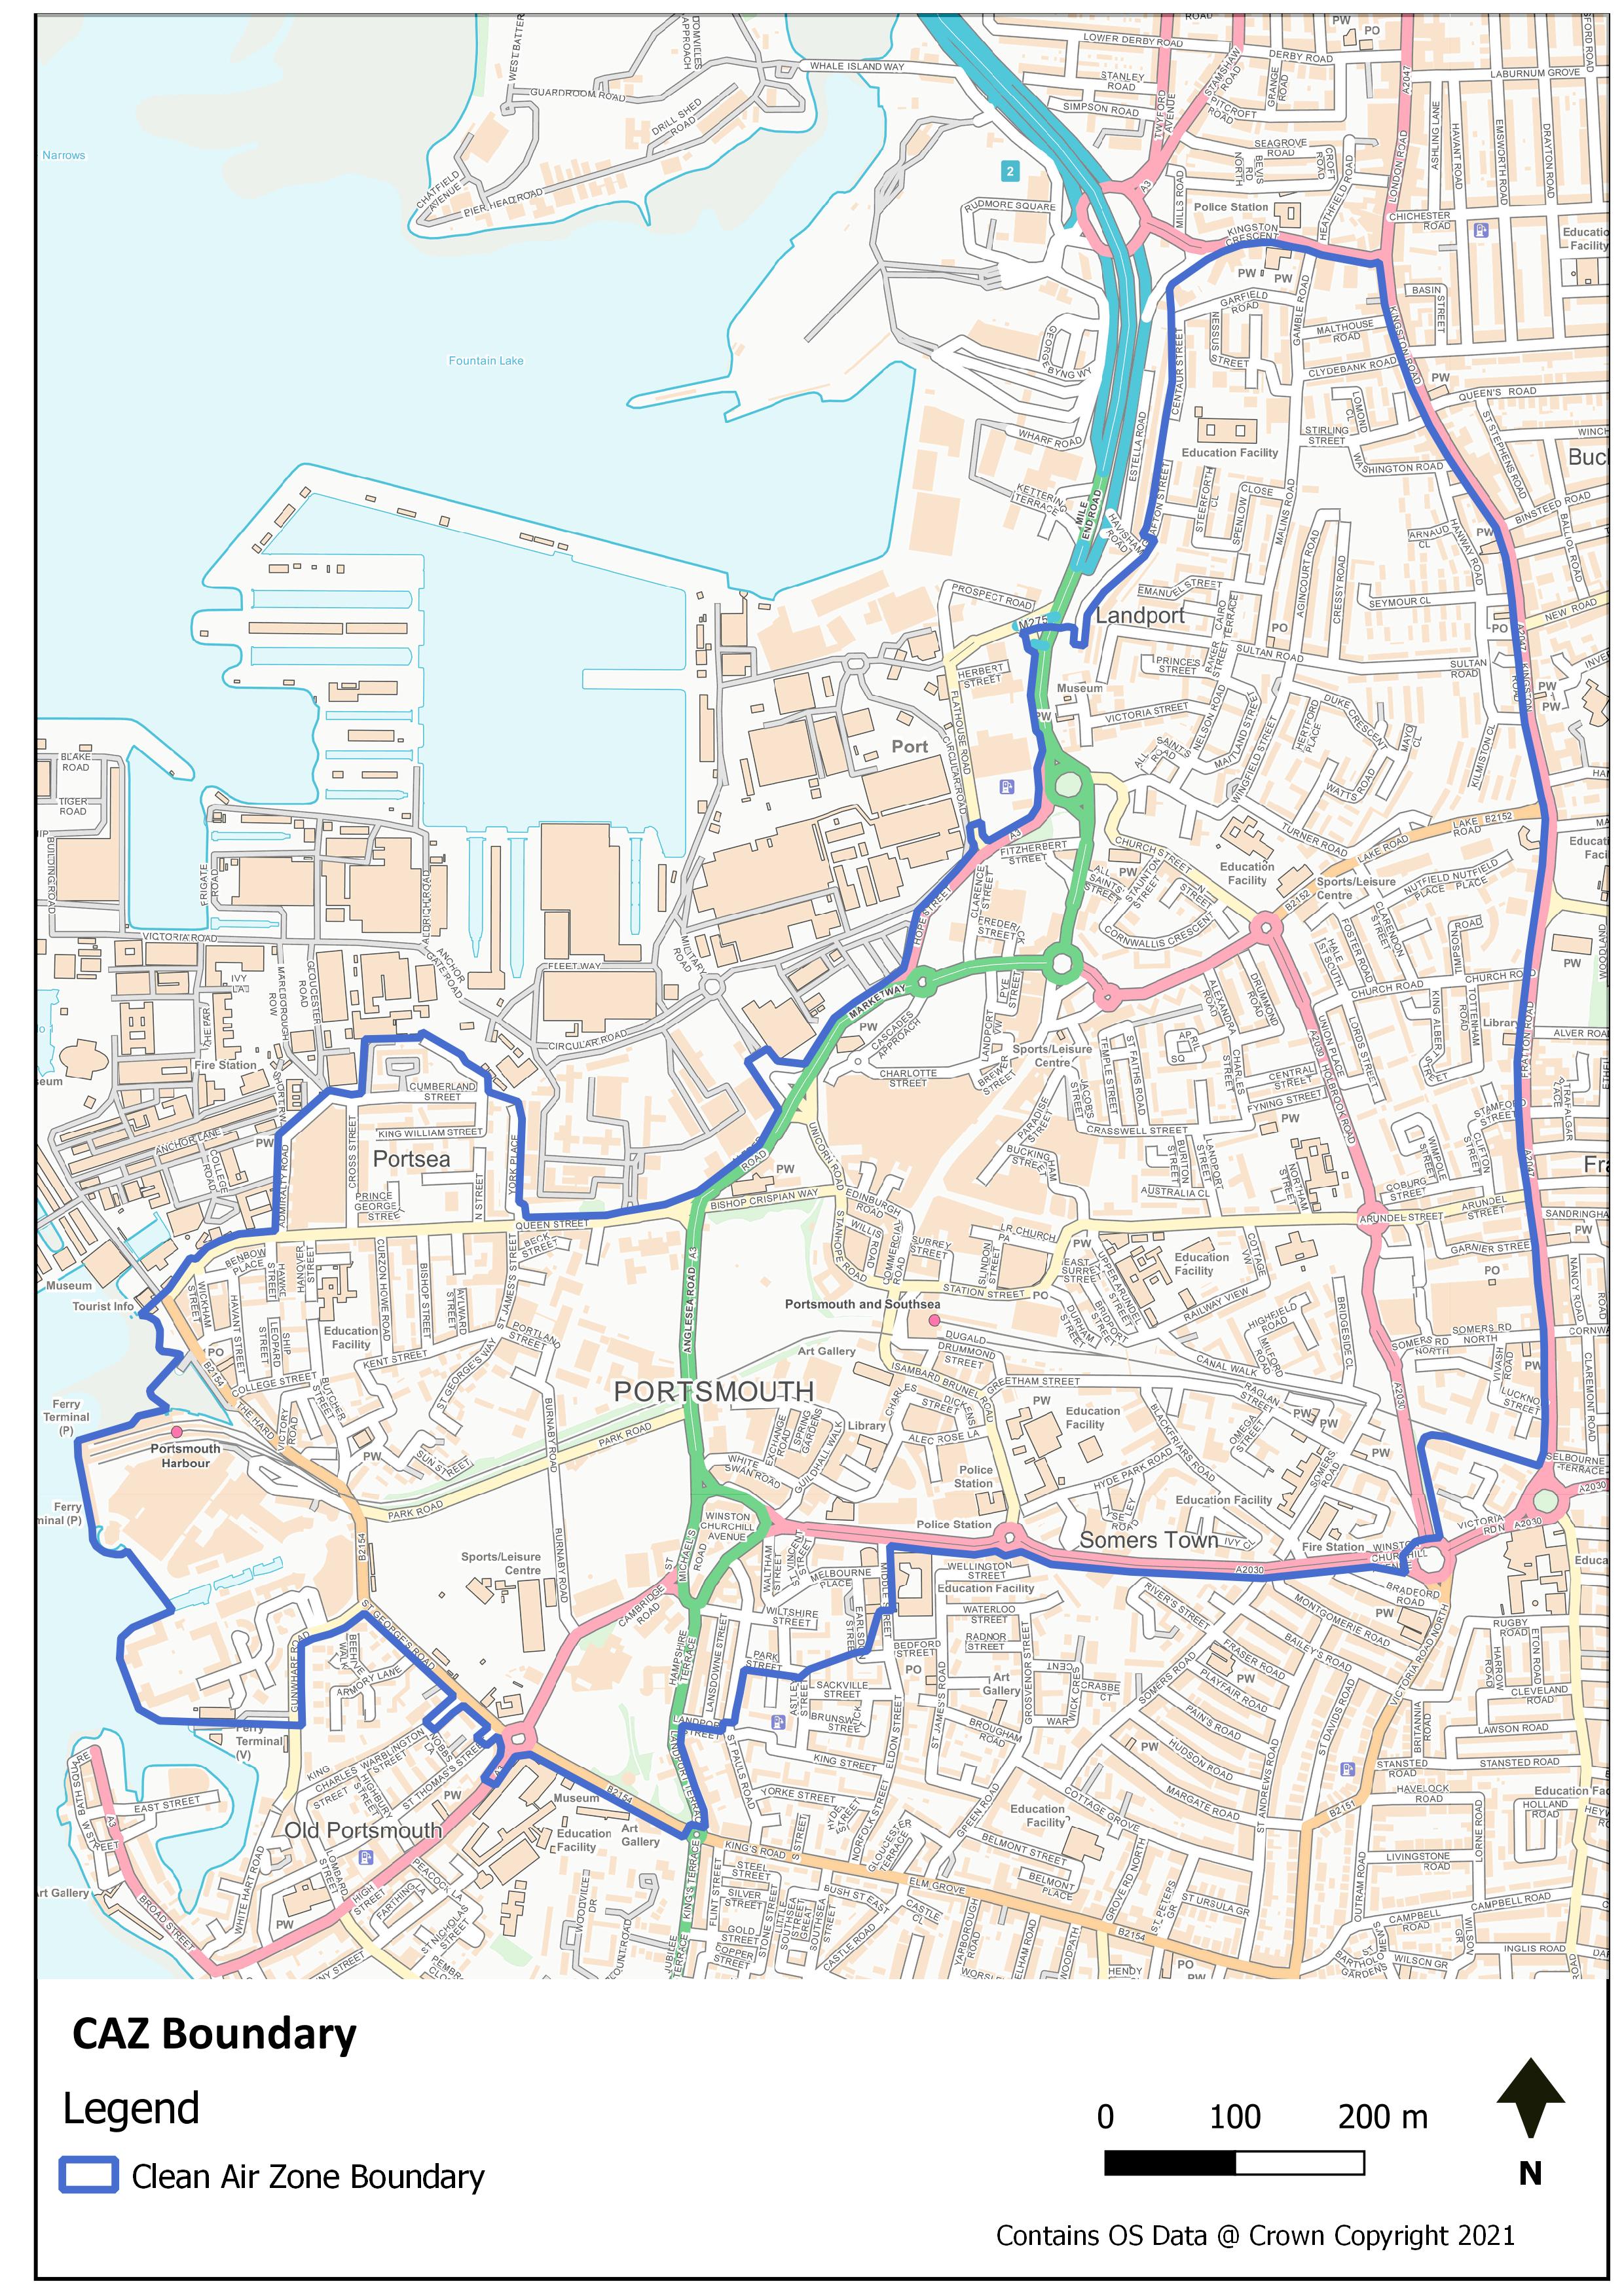 A boundary map of Portsmouth’s new Clean Air Zone